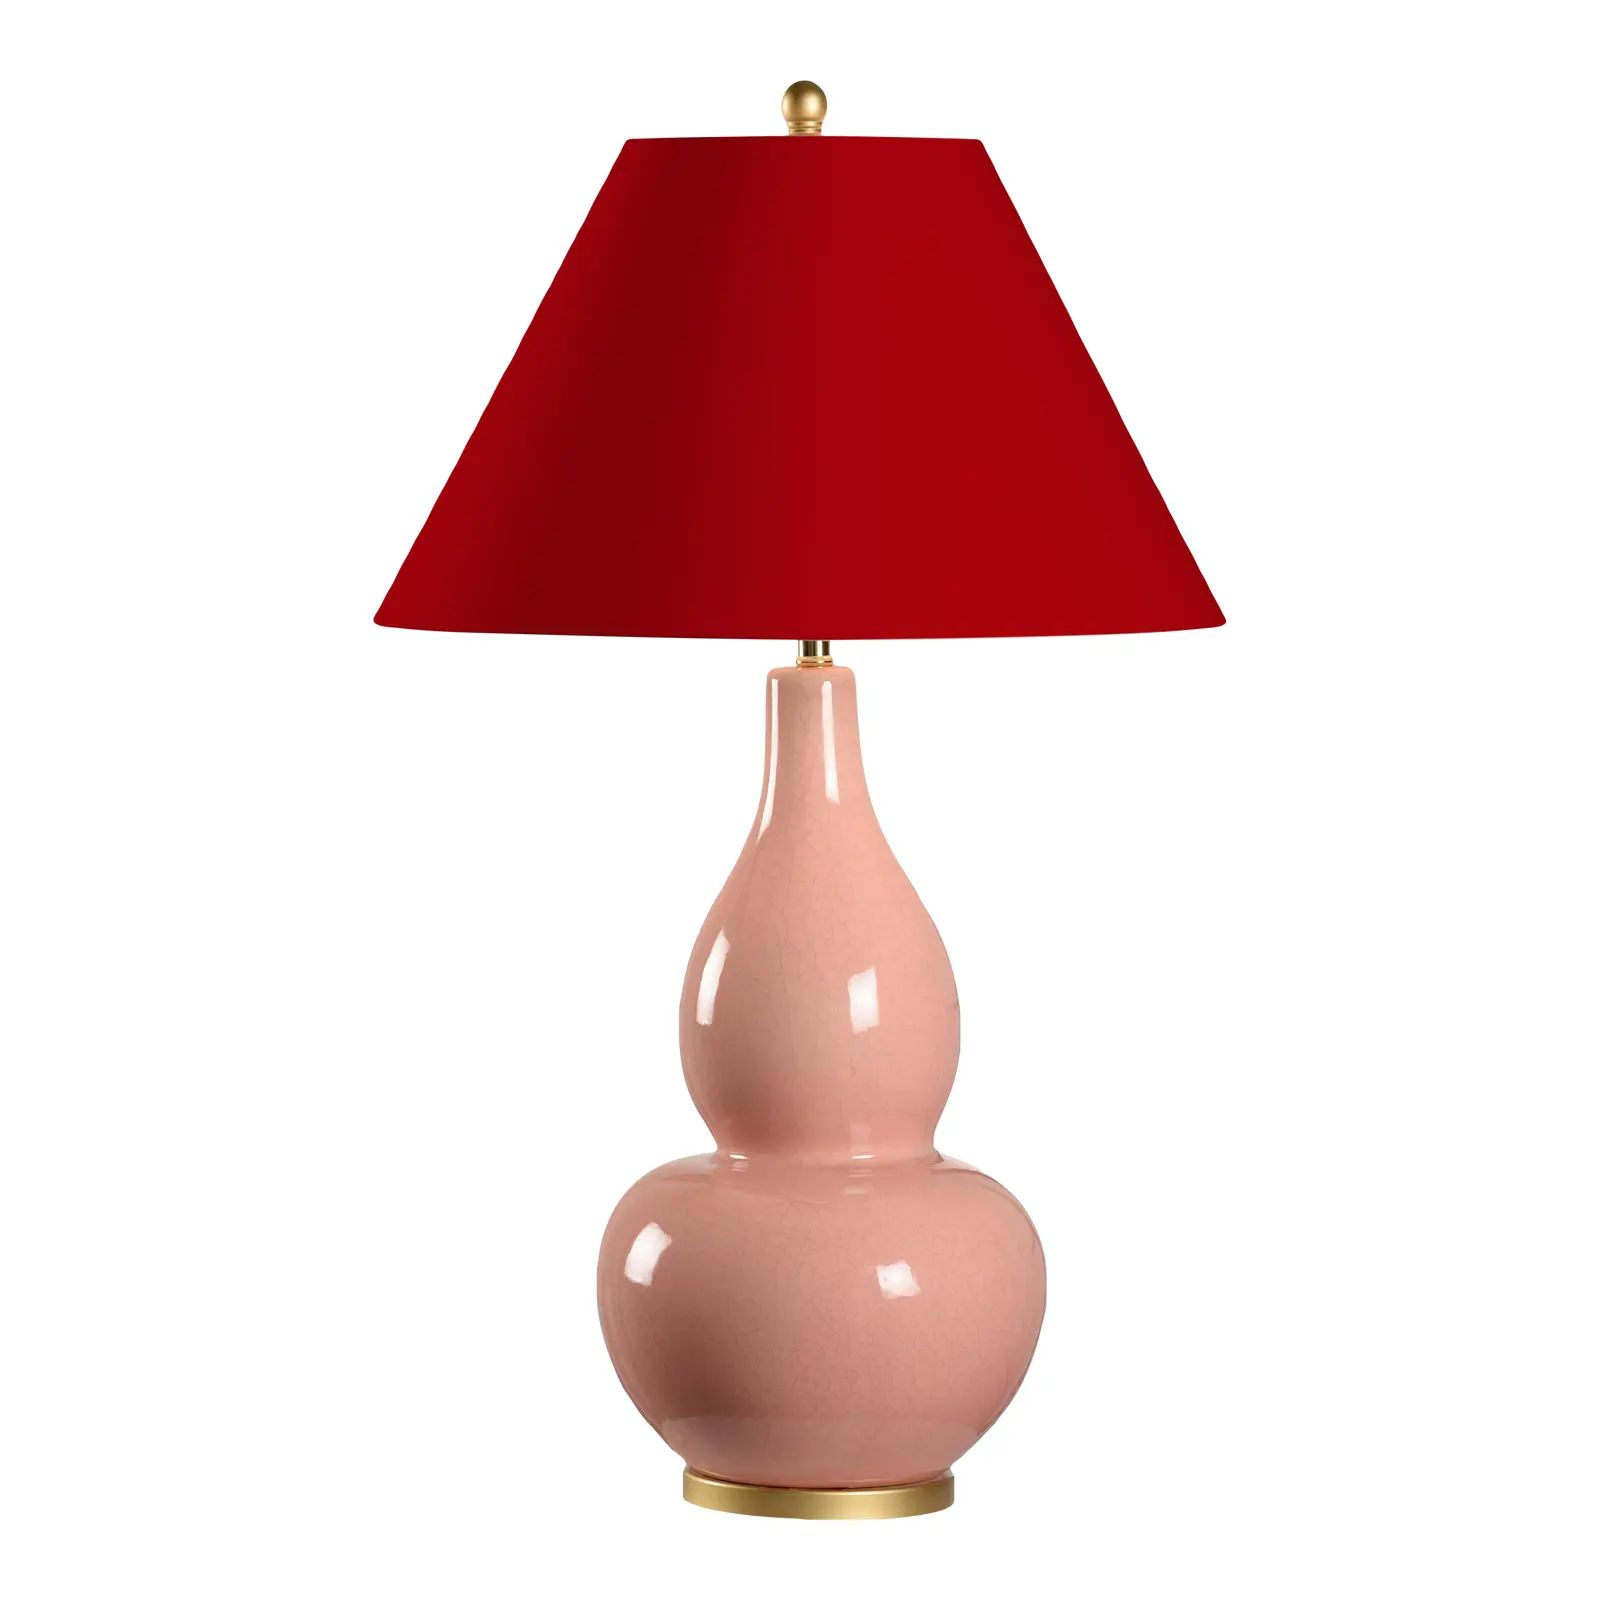 Casa Cosima Large Double Gourd Table Lamp, Light Pink Craquelure Base with Heritage Red Lampshade | Chairish